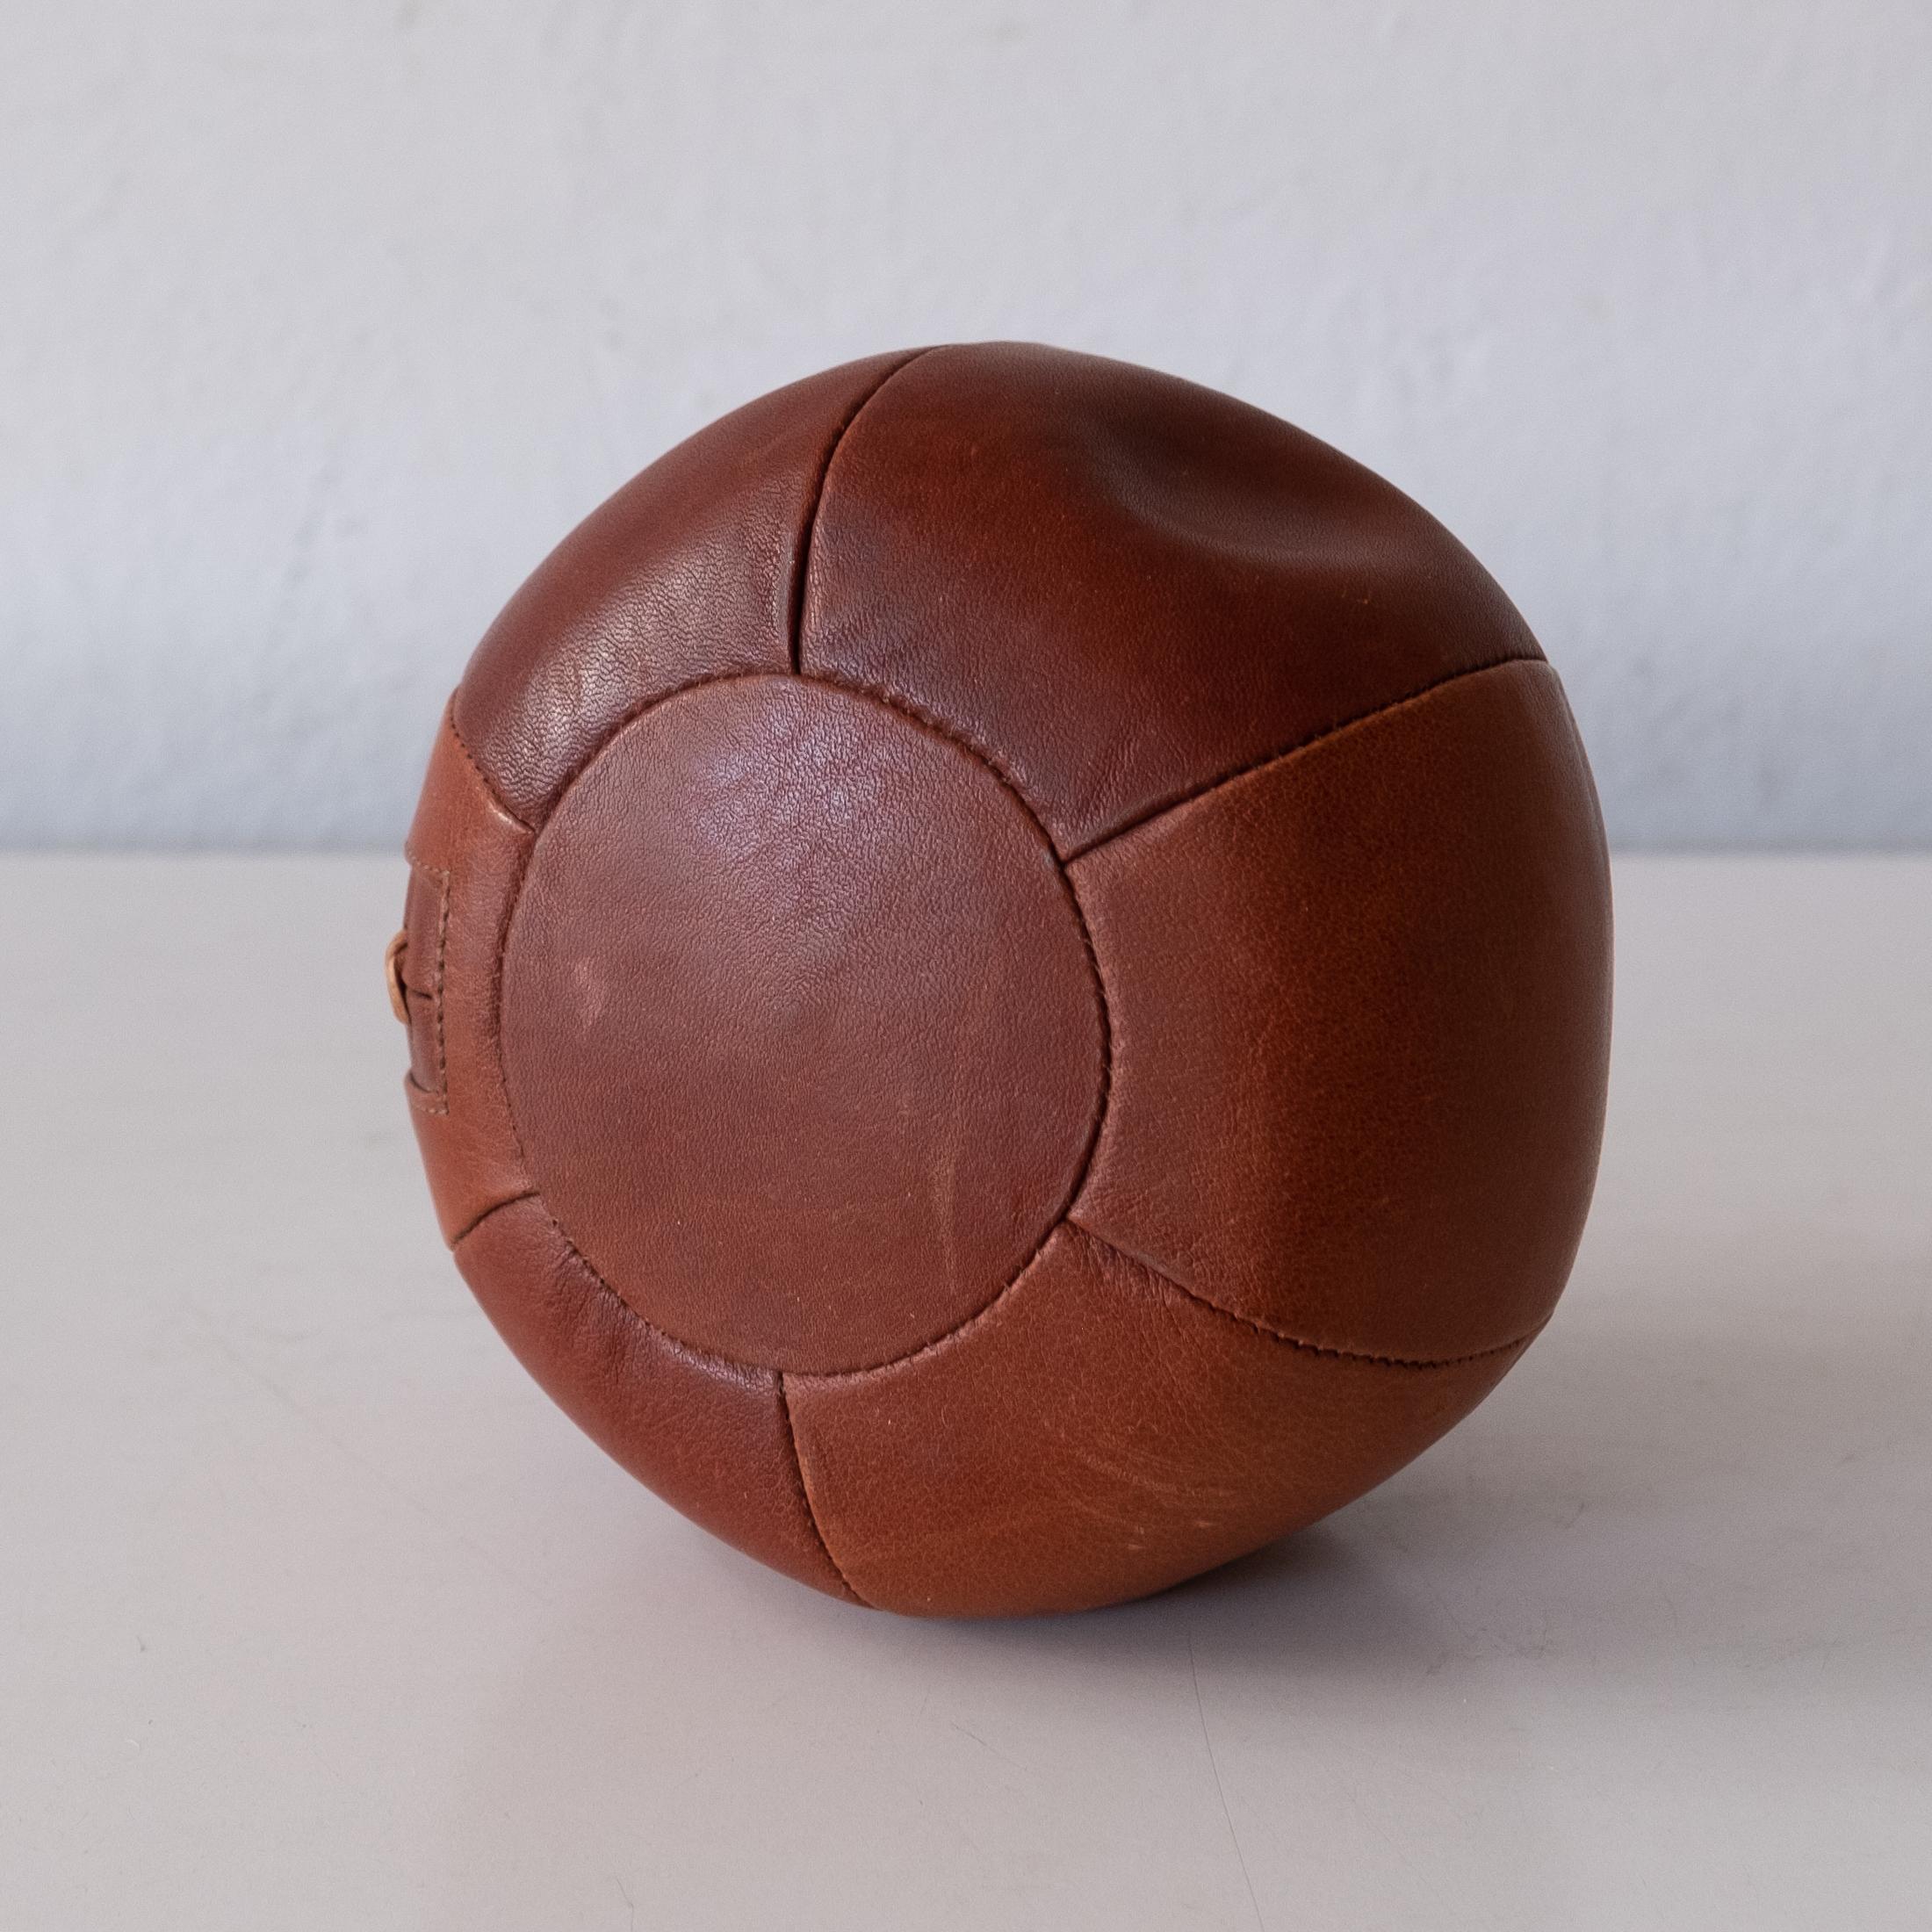 Cognac Leather Medicine Ball Paperweight In Good Condition For Sale In San Diego, CA